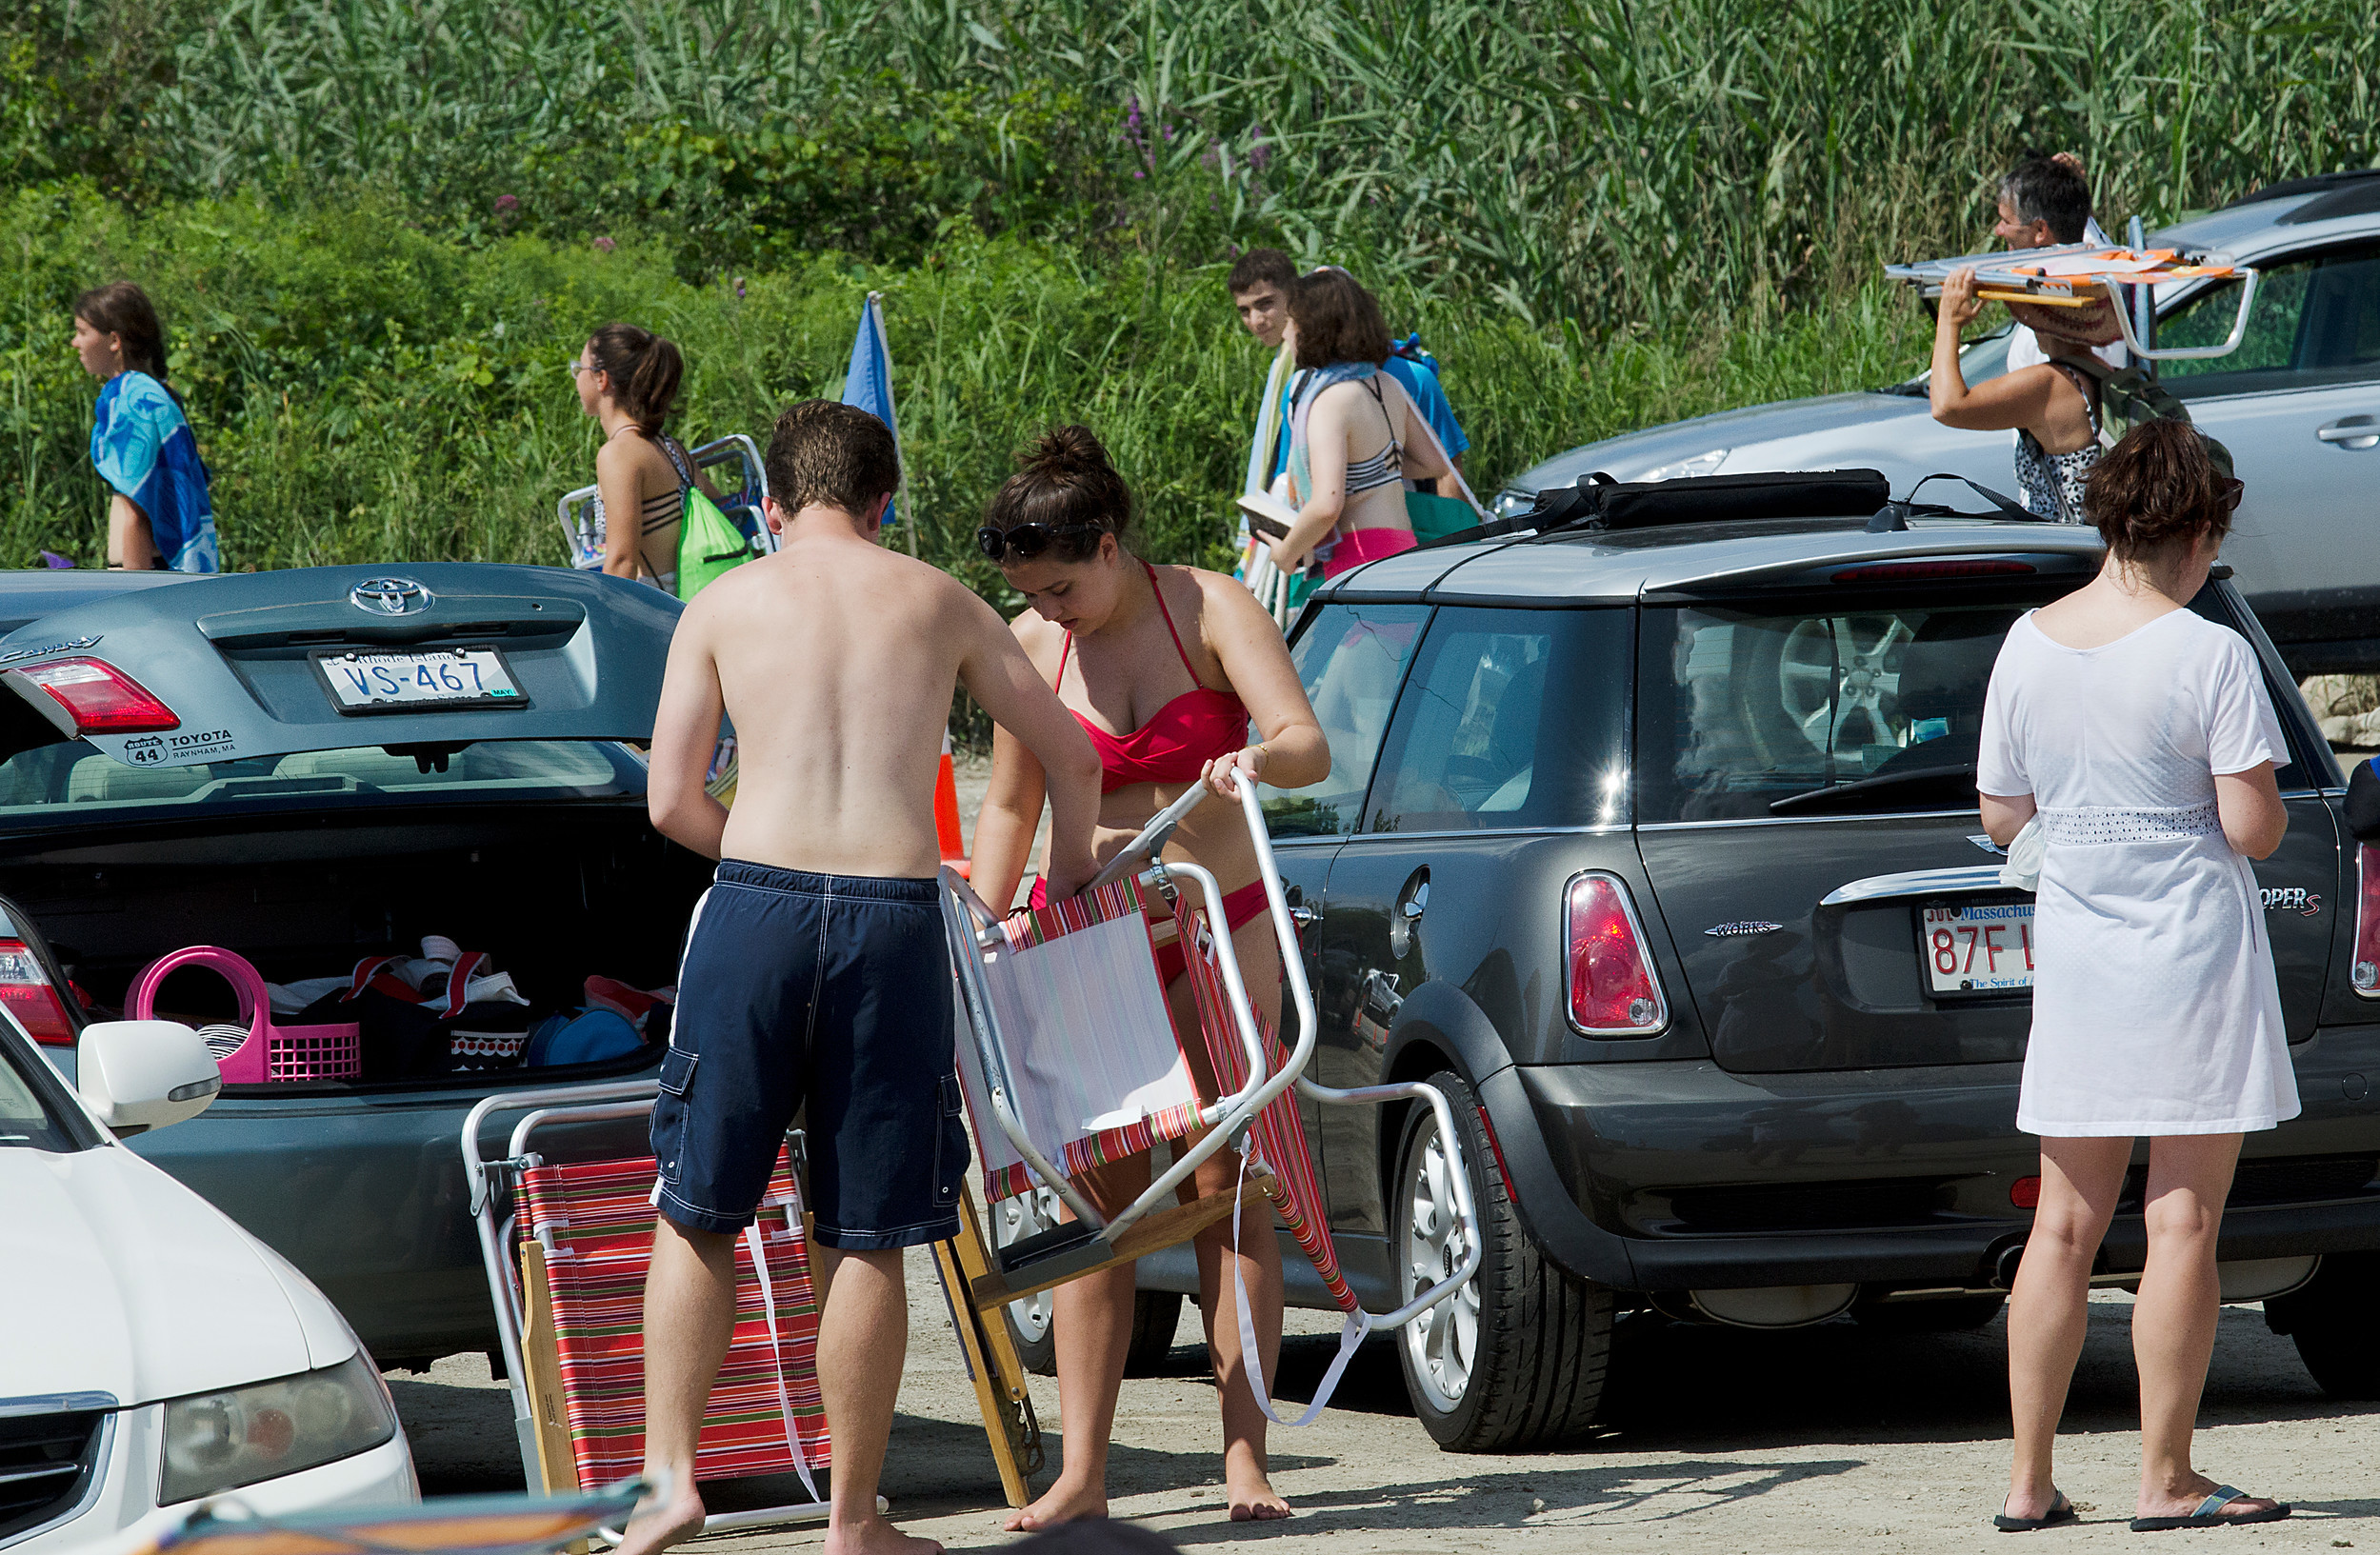 Beach goers pack up as police close the beach due to the huge surf that Gert created combined with the high tide. Waves were covering the beach and spilling into the parking lot.